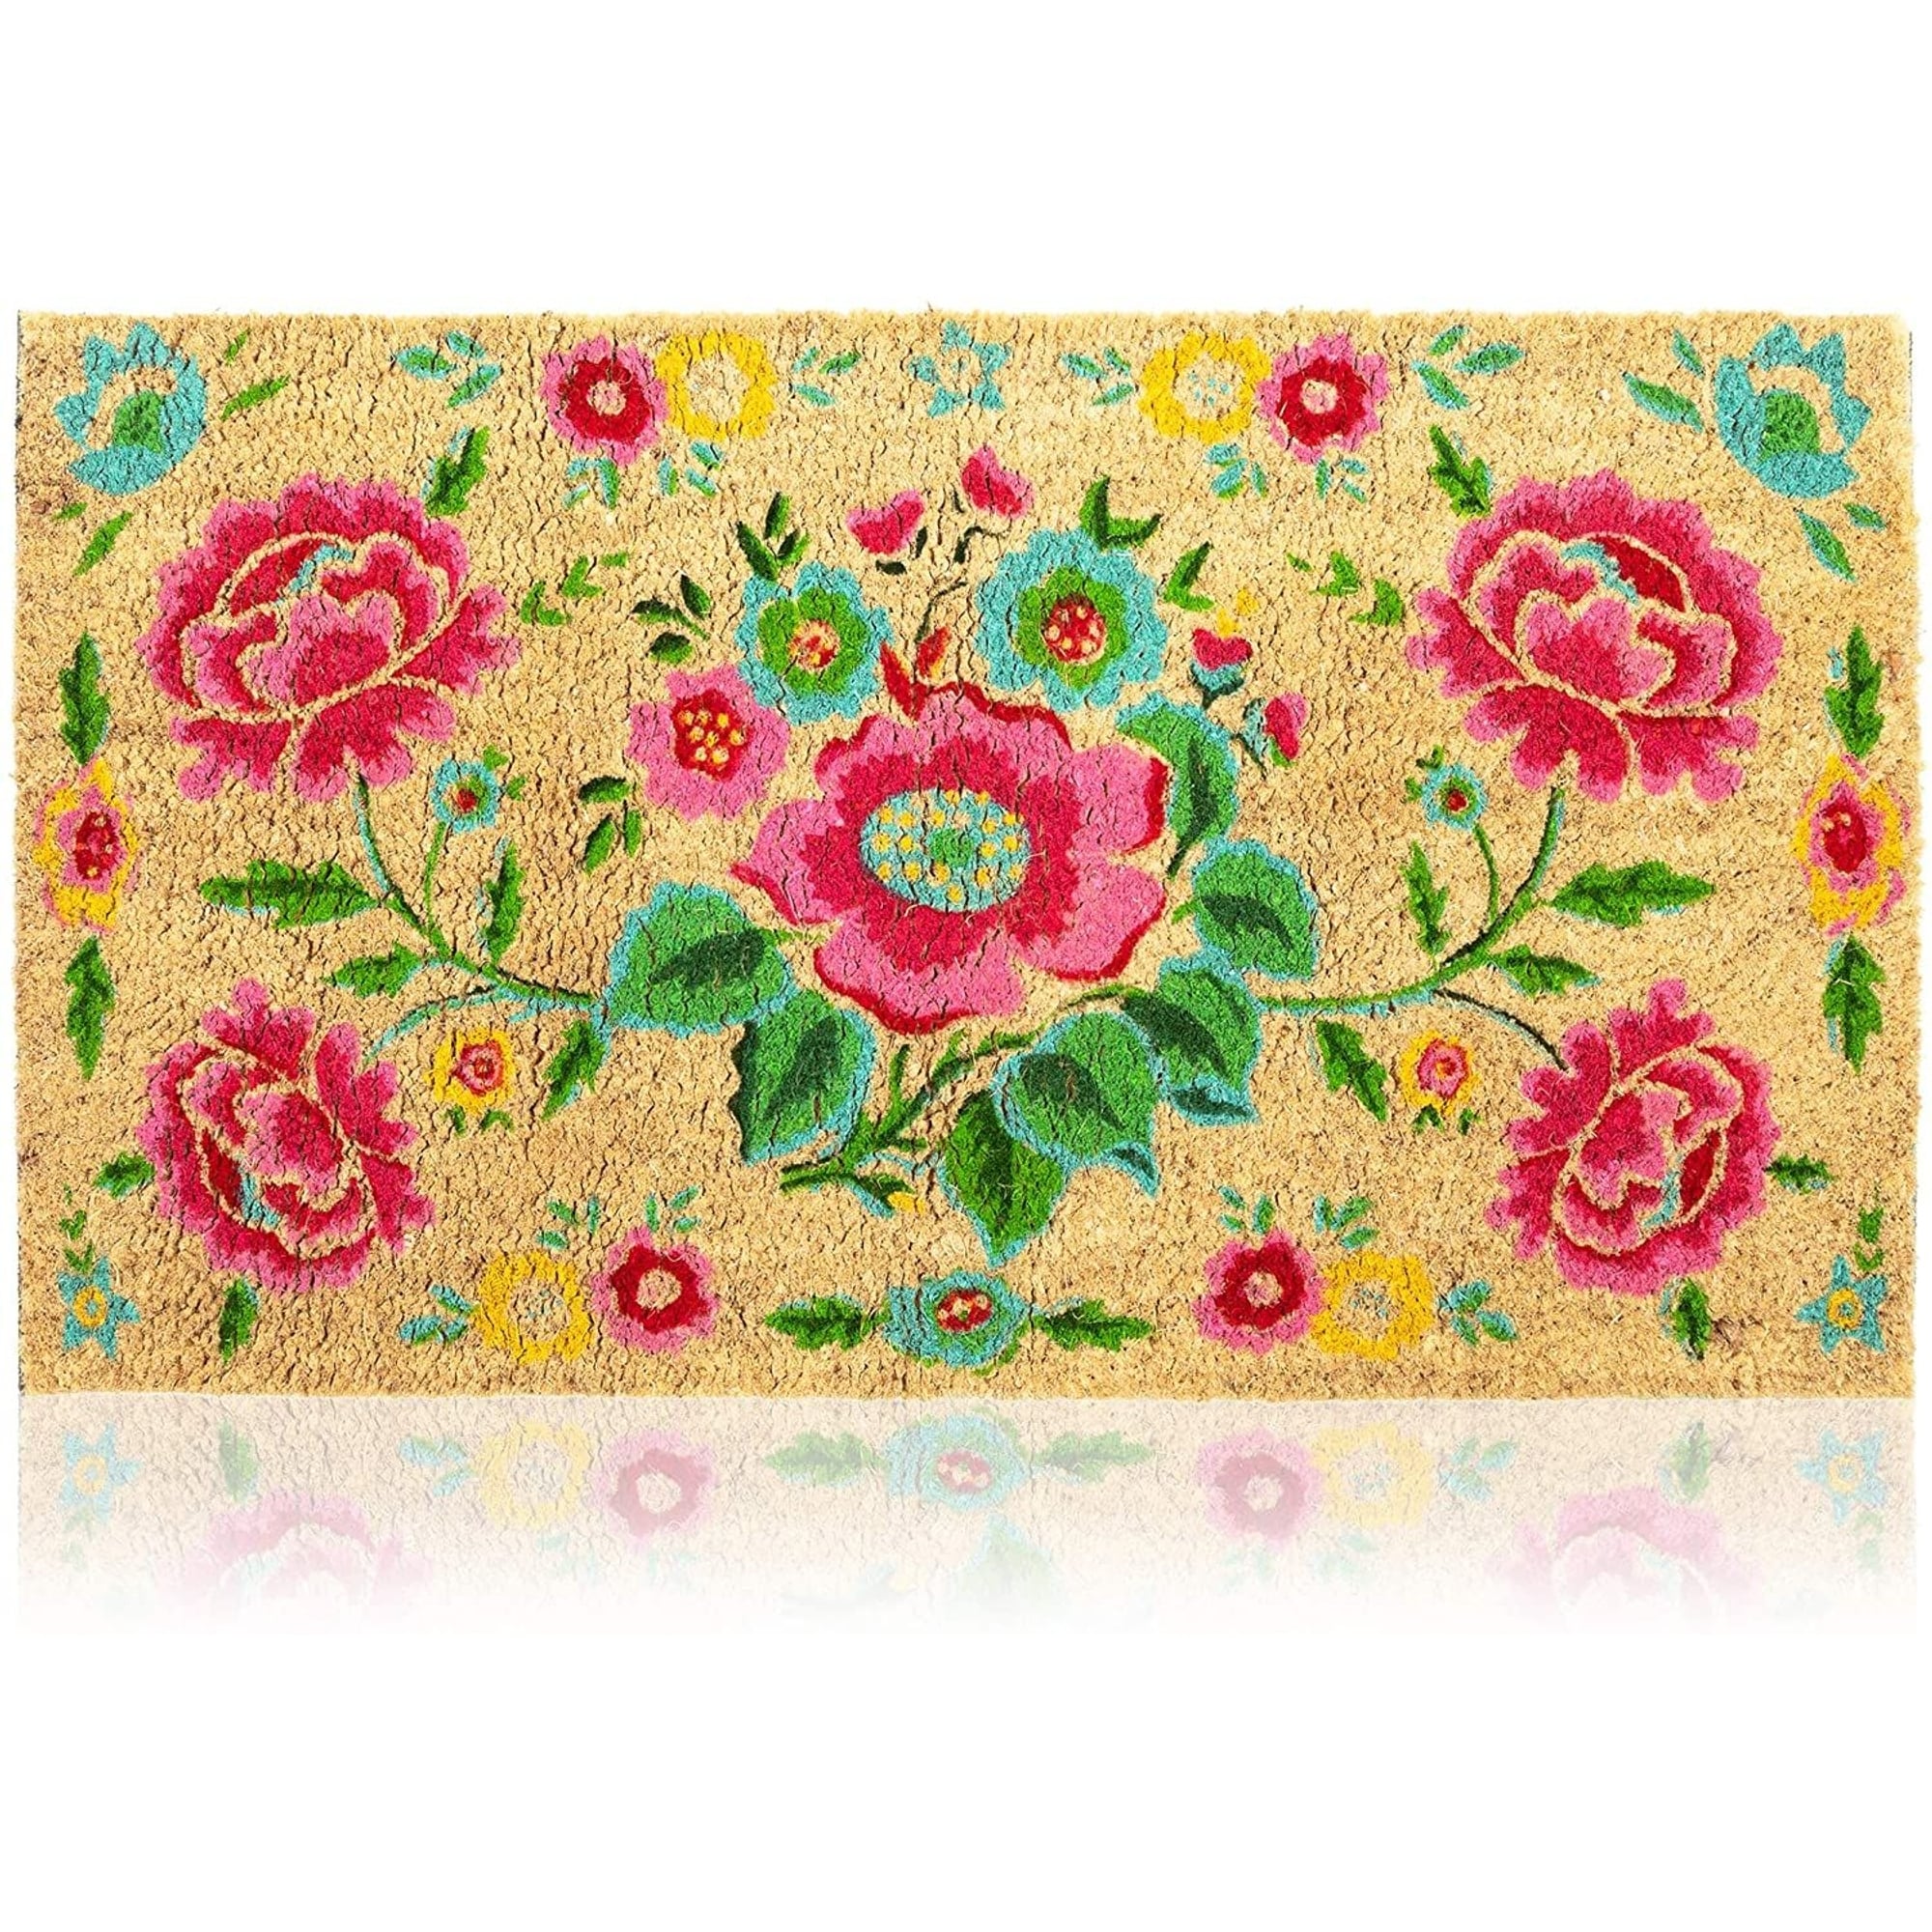 https://ak1.ostkcdn.com/images/products/is/images/direct/21dc191e87a0cb061c3d709bcf0d1d72d92691e6/Natural-Coir-Doormat%2C-Flower-Welcome-Mat-%2830-x-17-In%29.jpg